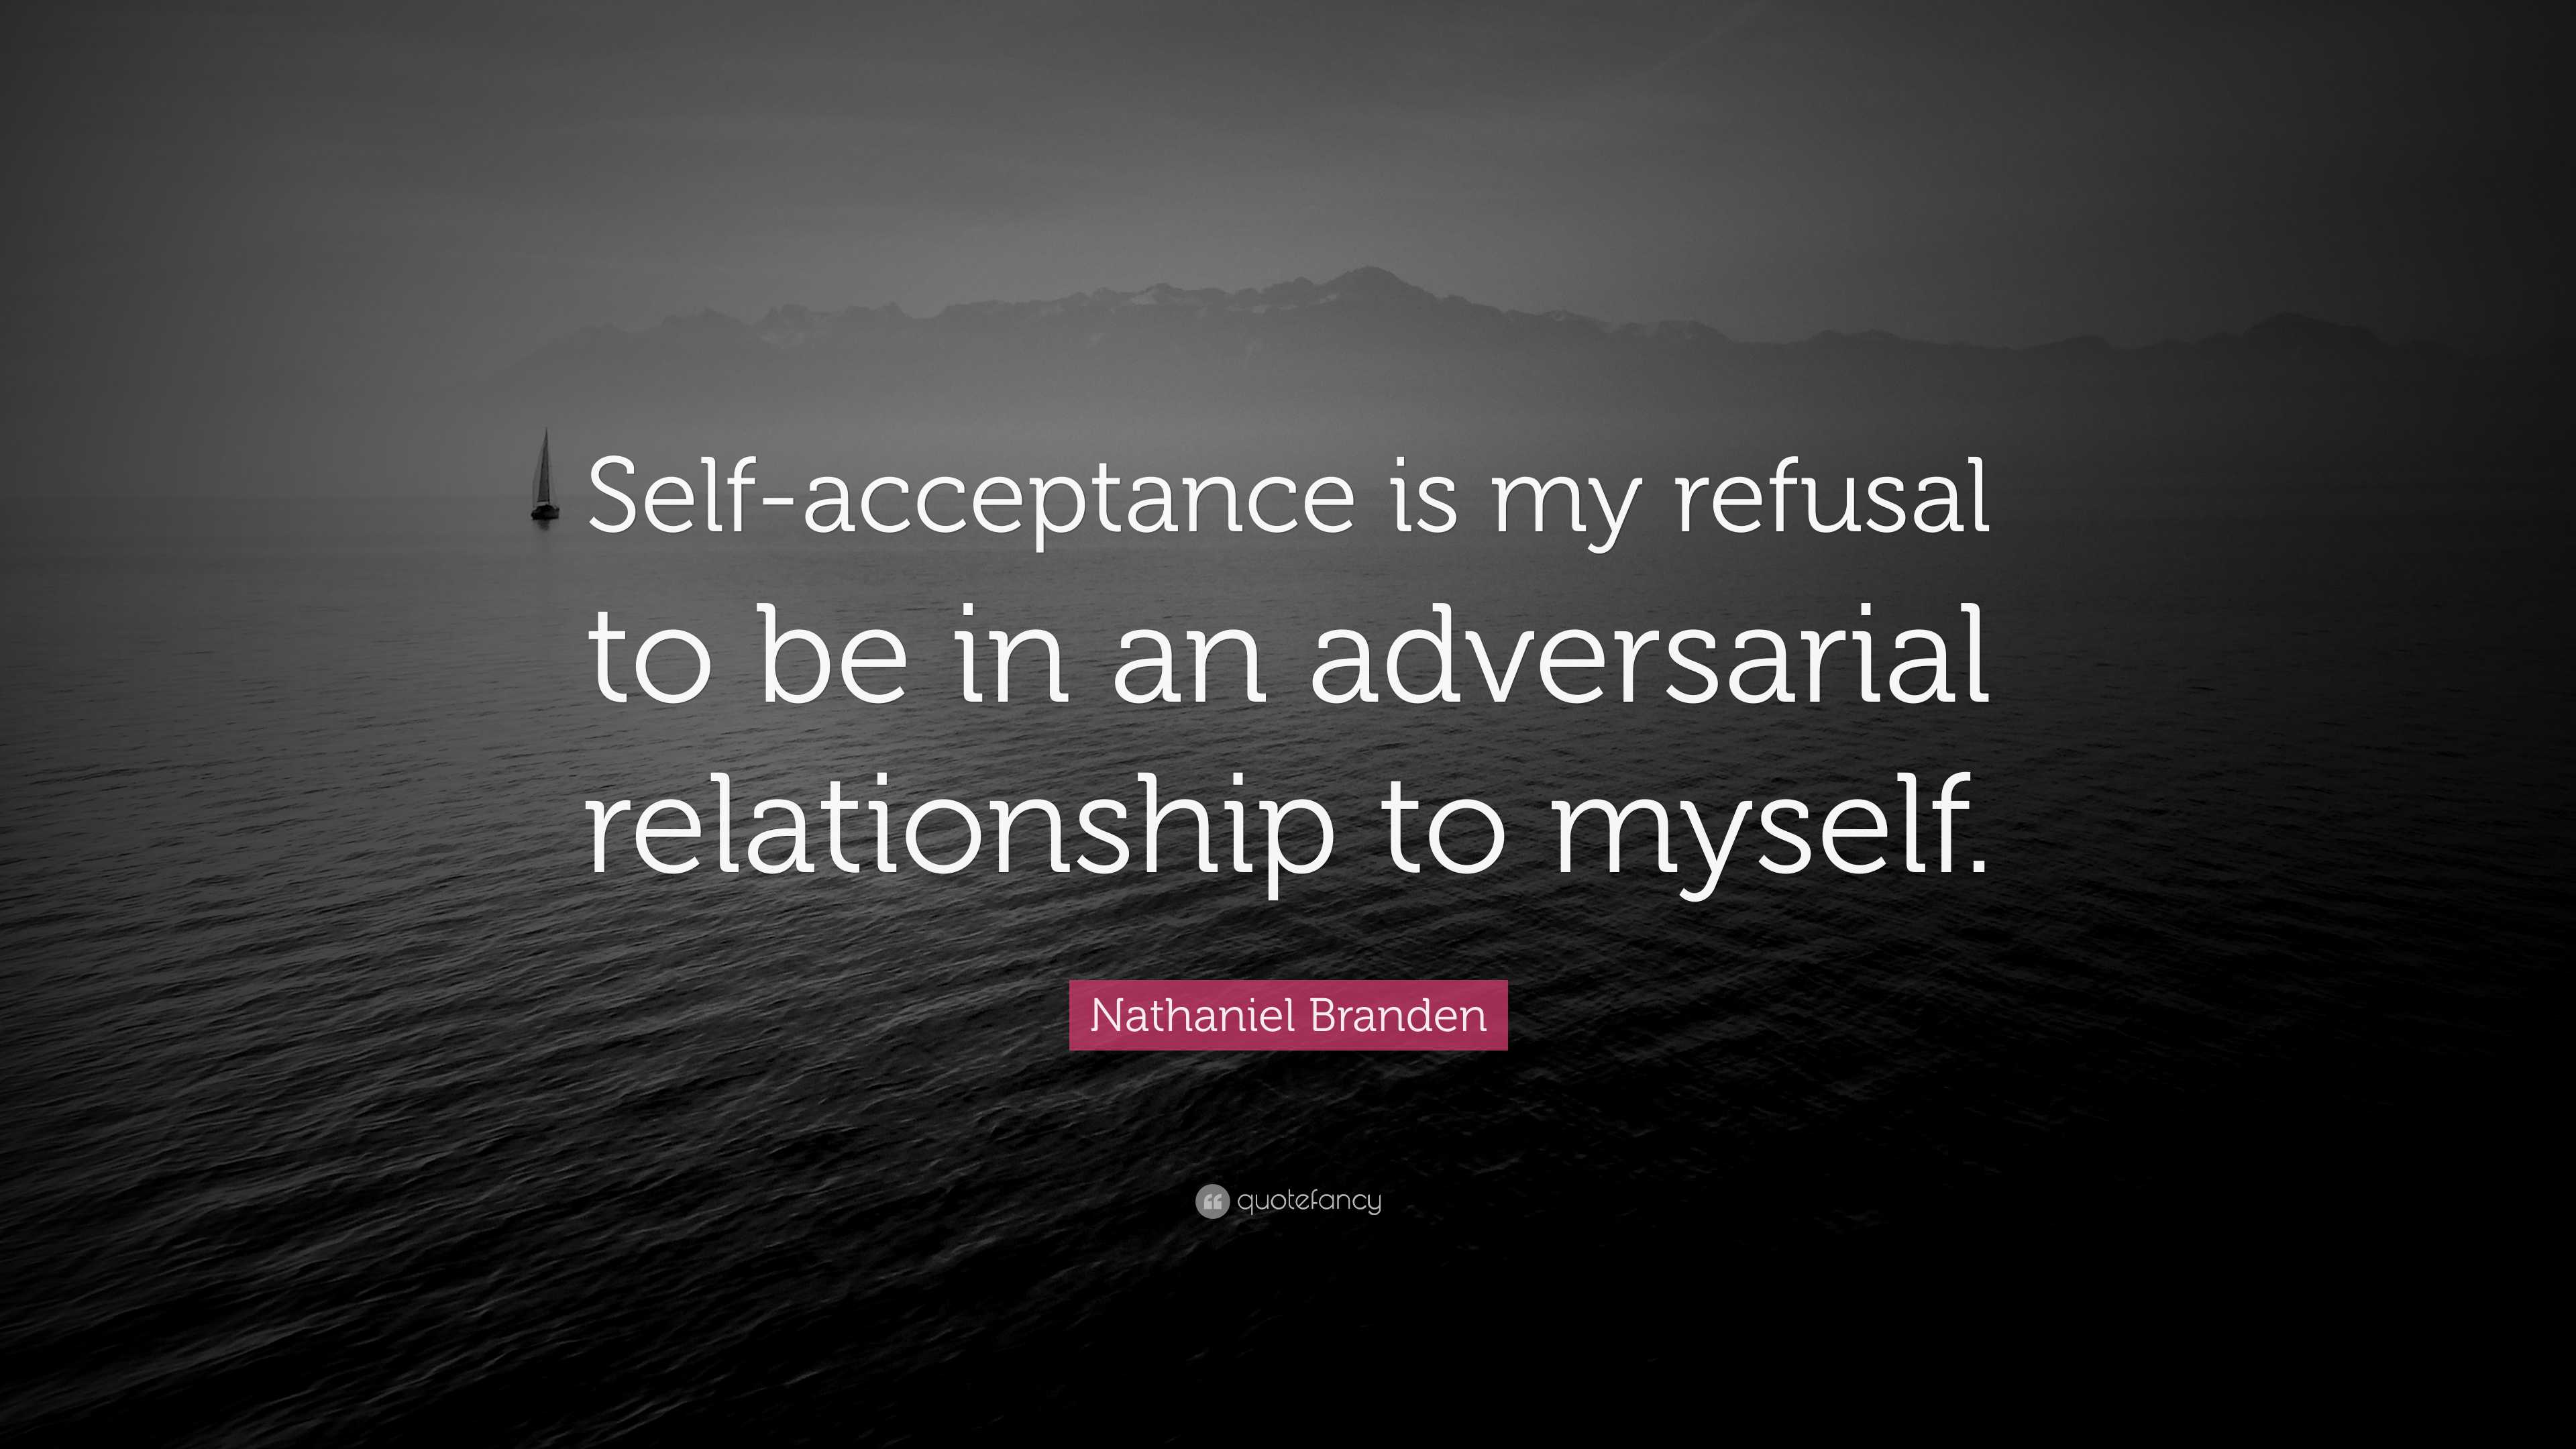 Nathaniel Branden Quote “self Acceptance Is My Refusal To Be In An Adversarial Relationship To